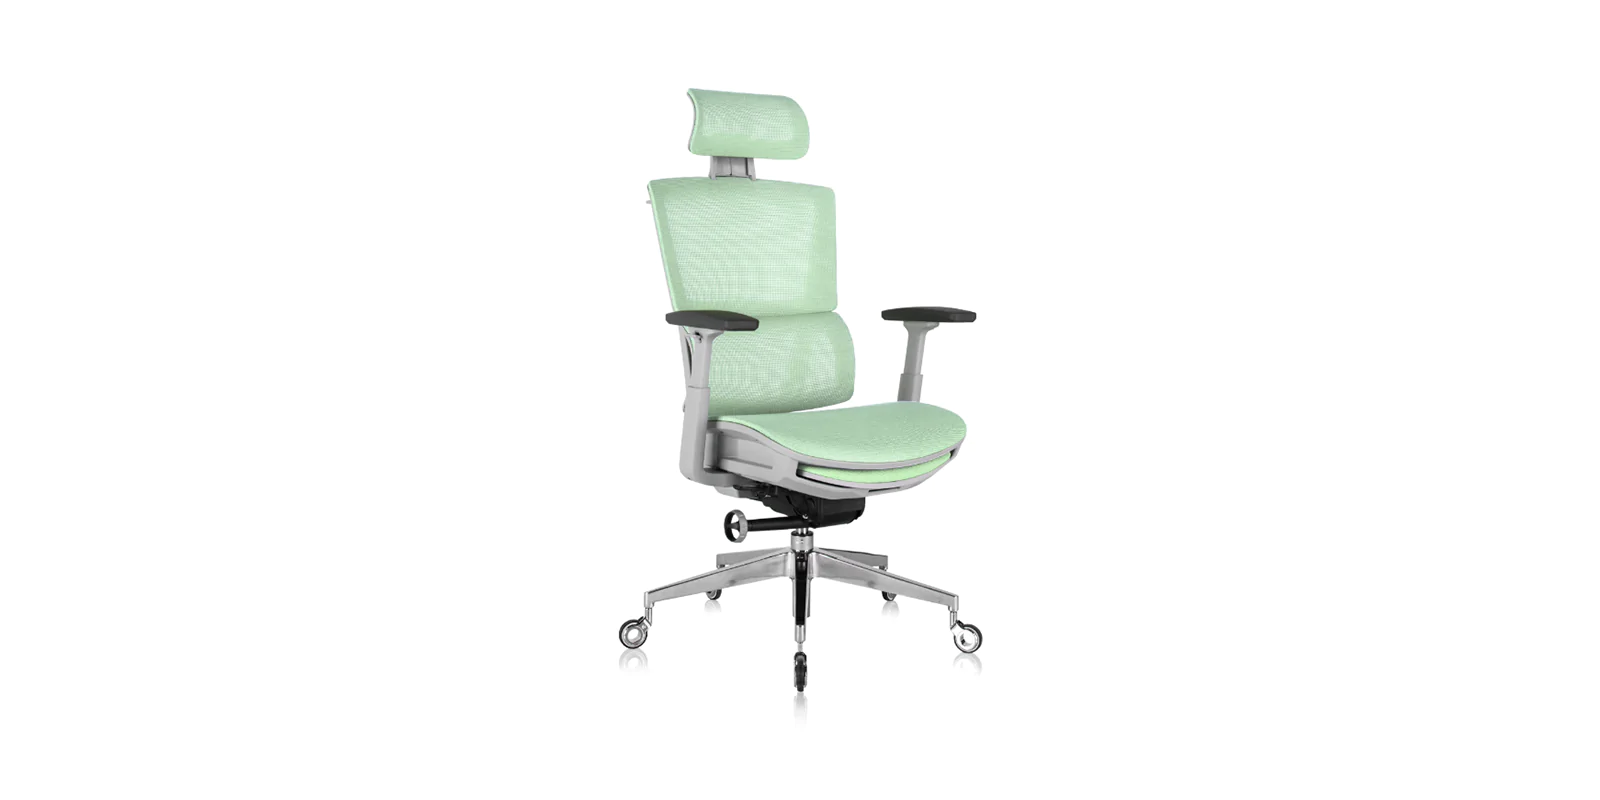 Which office chairs are best for sitting long hours?